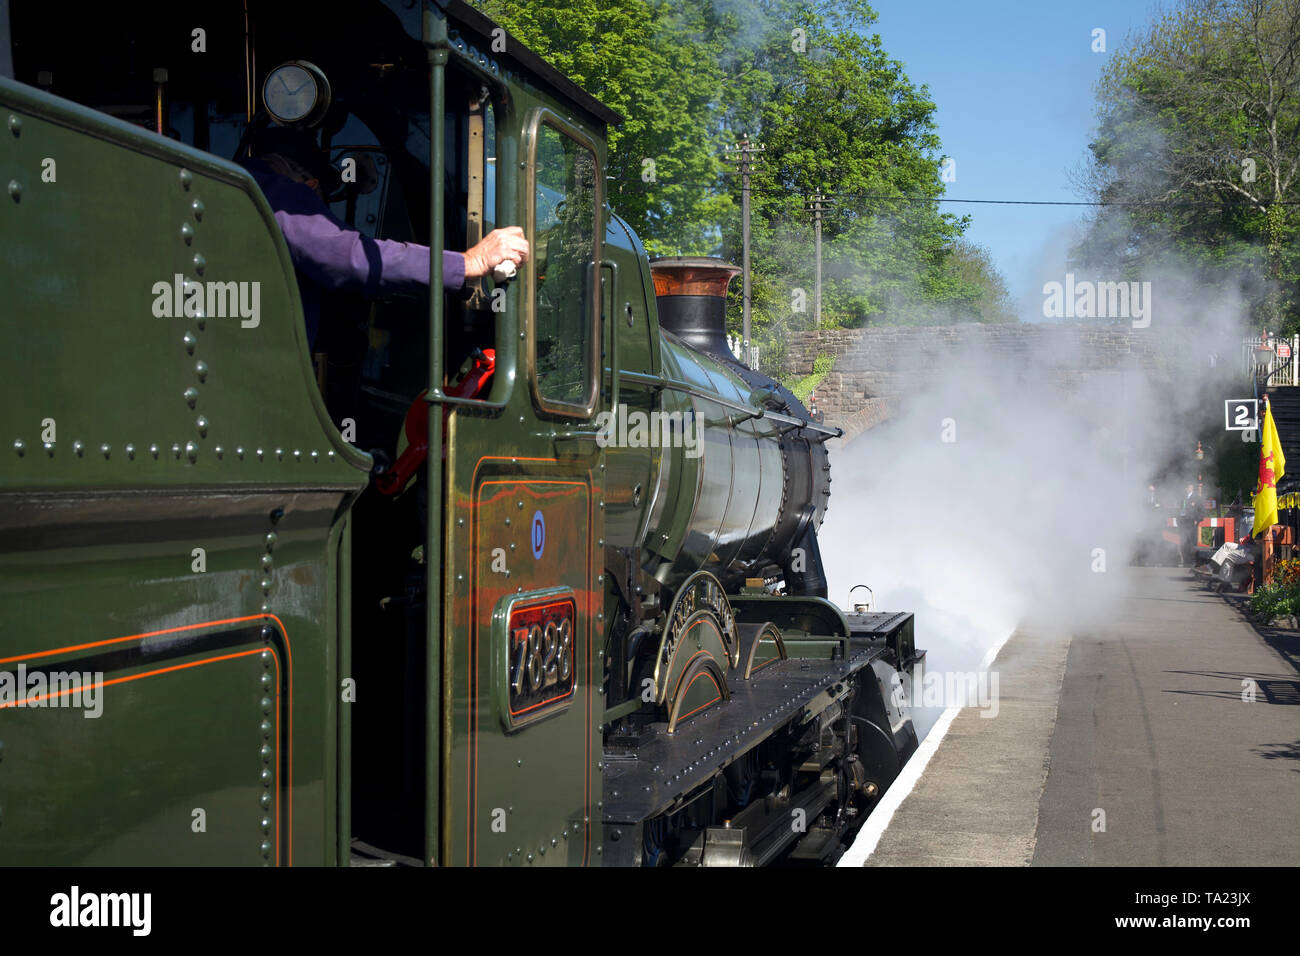 A steam locomotive leaving the platform of Bishops Lydeard railway station in Somerset, UK, with some steam blurring the more distant view. Stock Photo